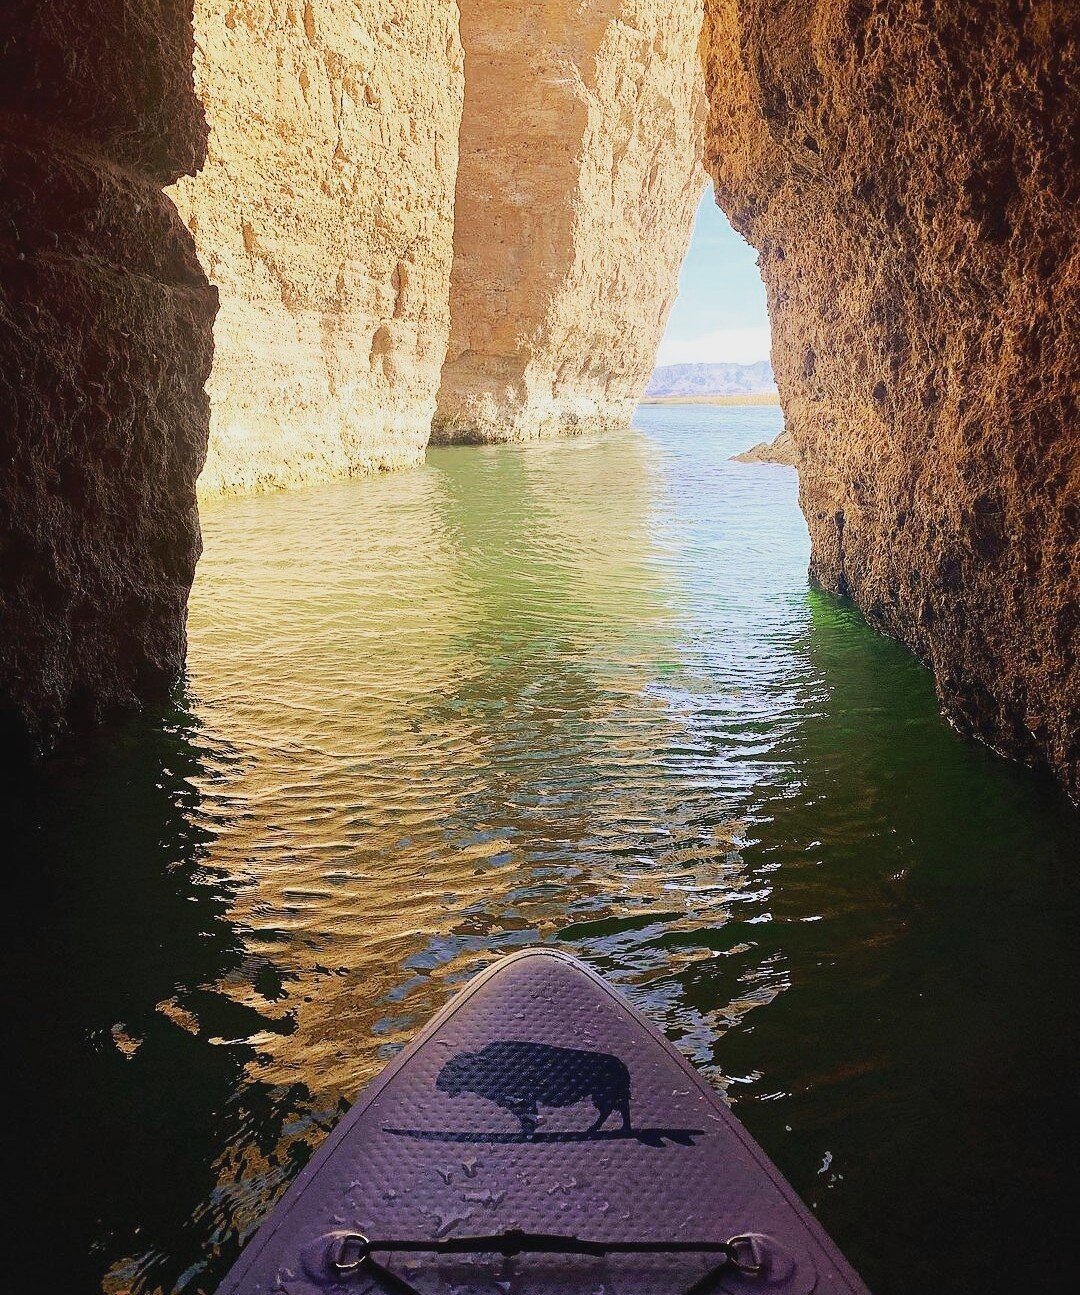 Inflatable paddle board crossing Lake Havasu with large rock formations